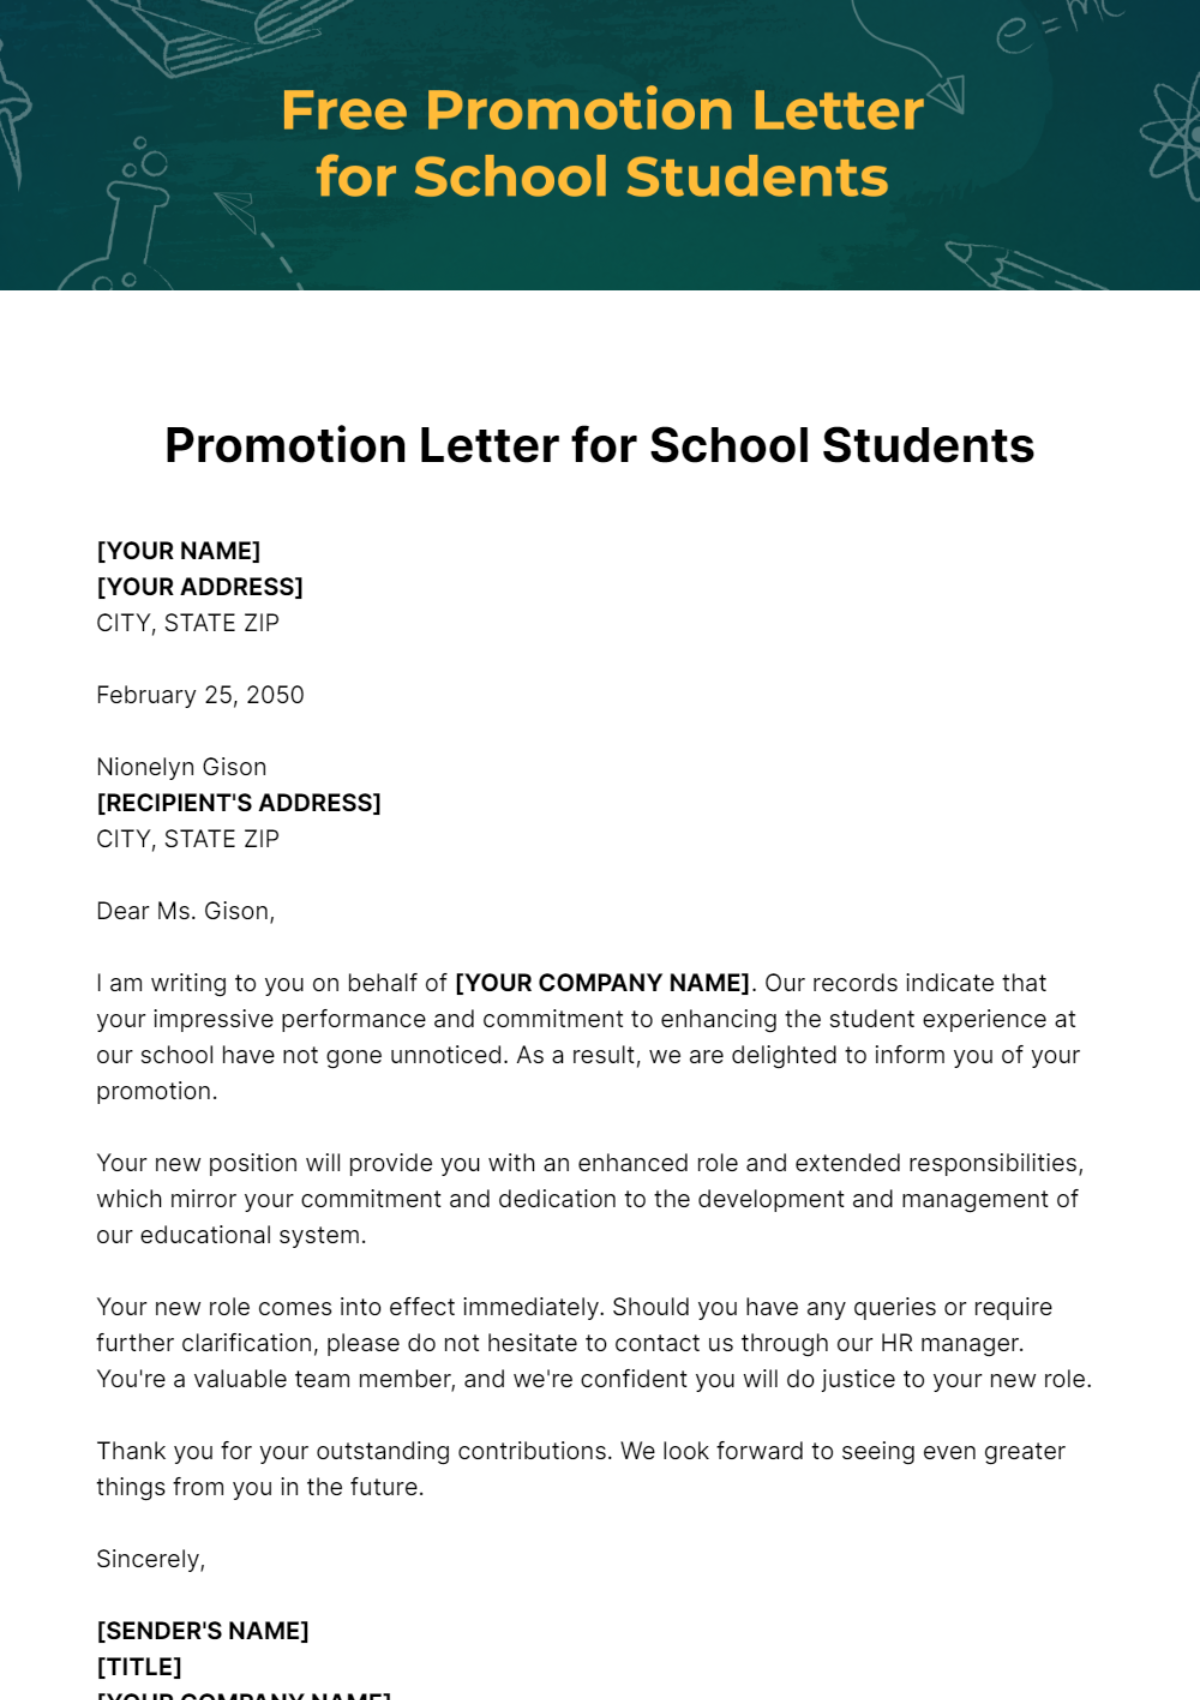 Promotion Letter for School Students Template